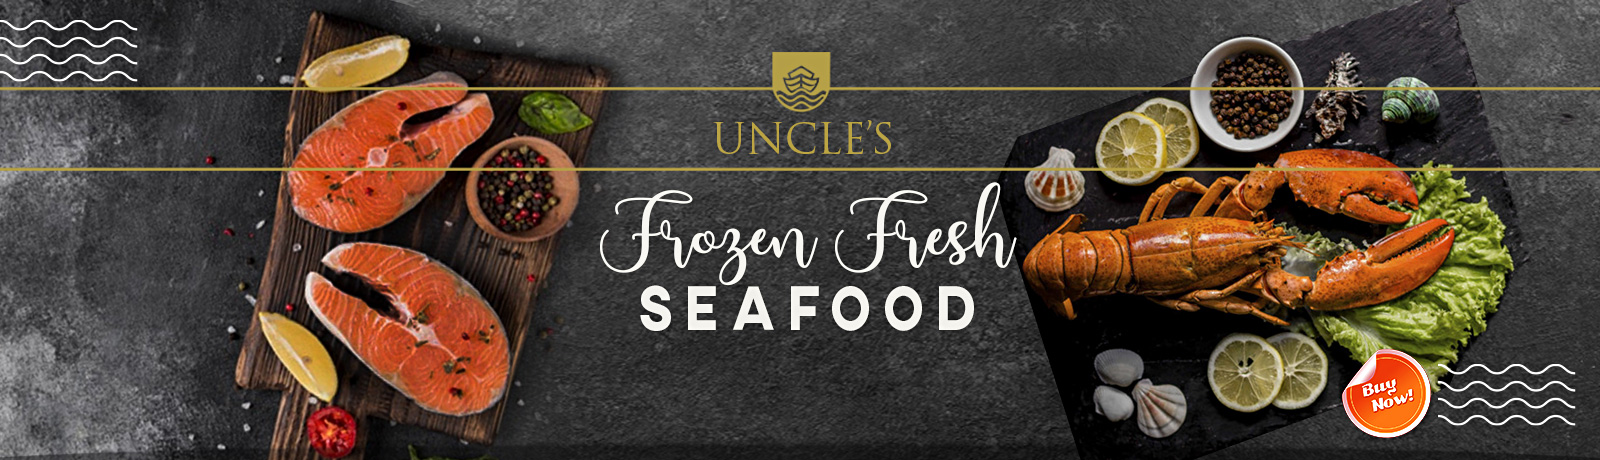 Uncles Exotic Seafood